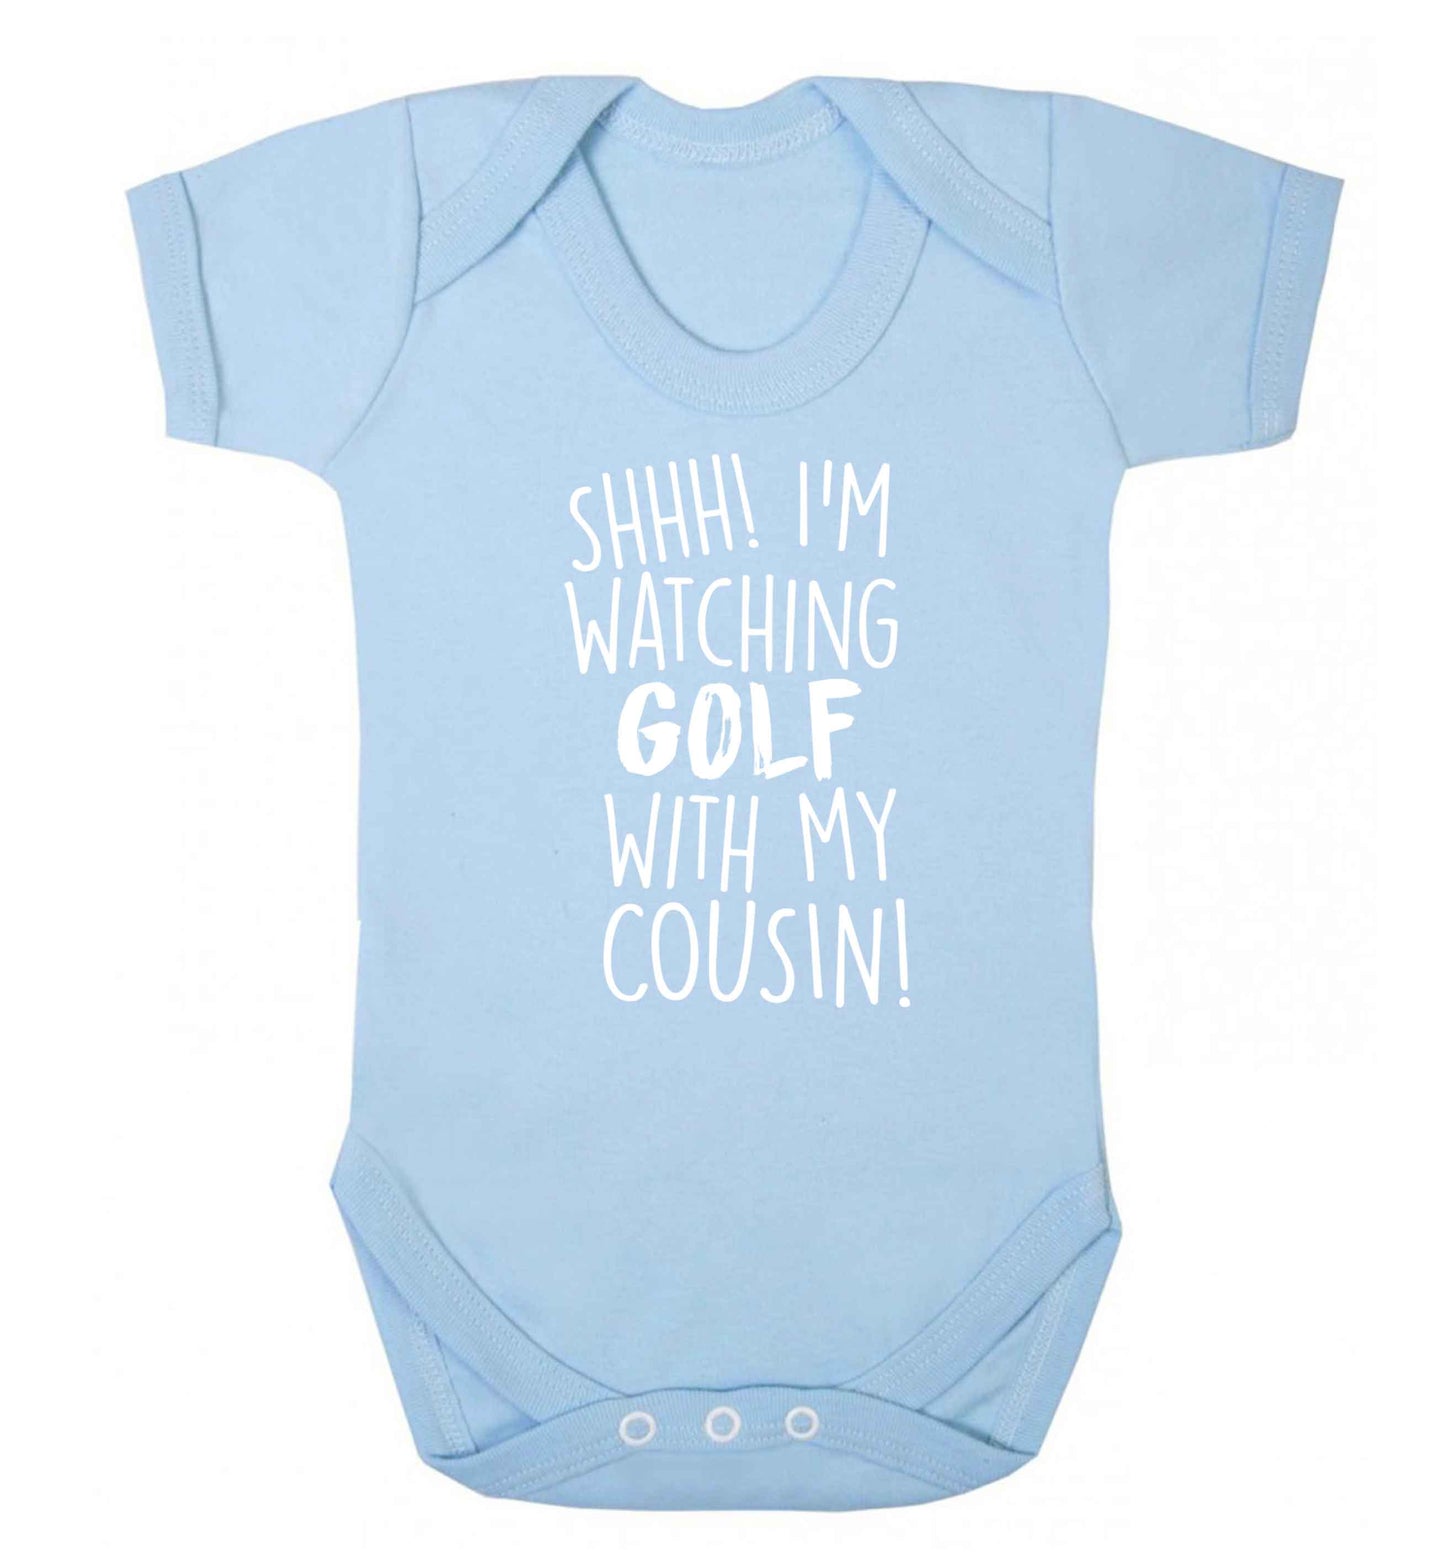 Shh I'm watching golf with my cousin Baby Vest pale blue 18-24 months